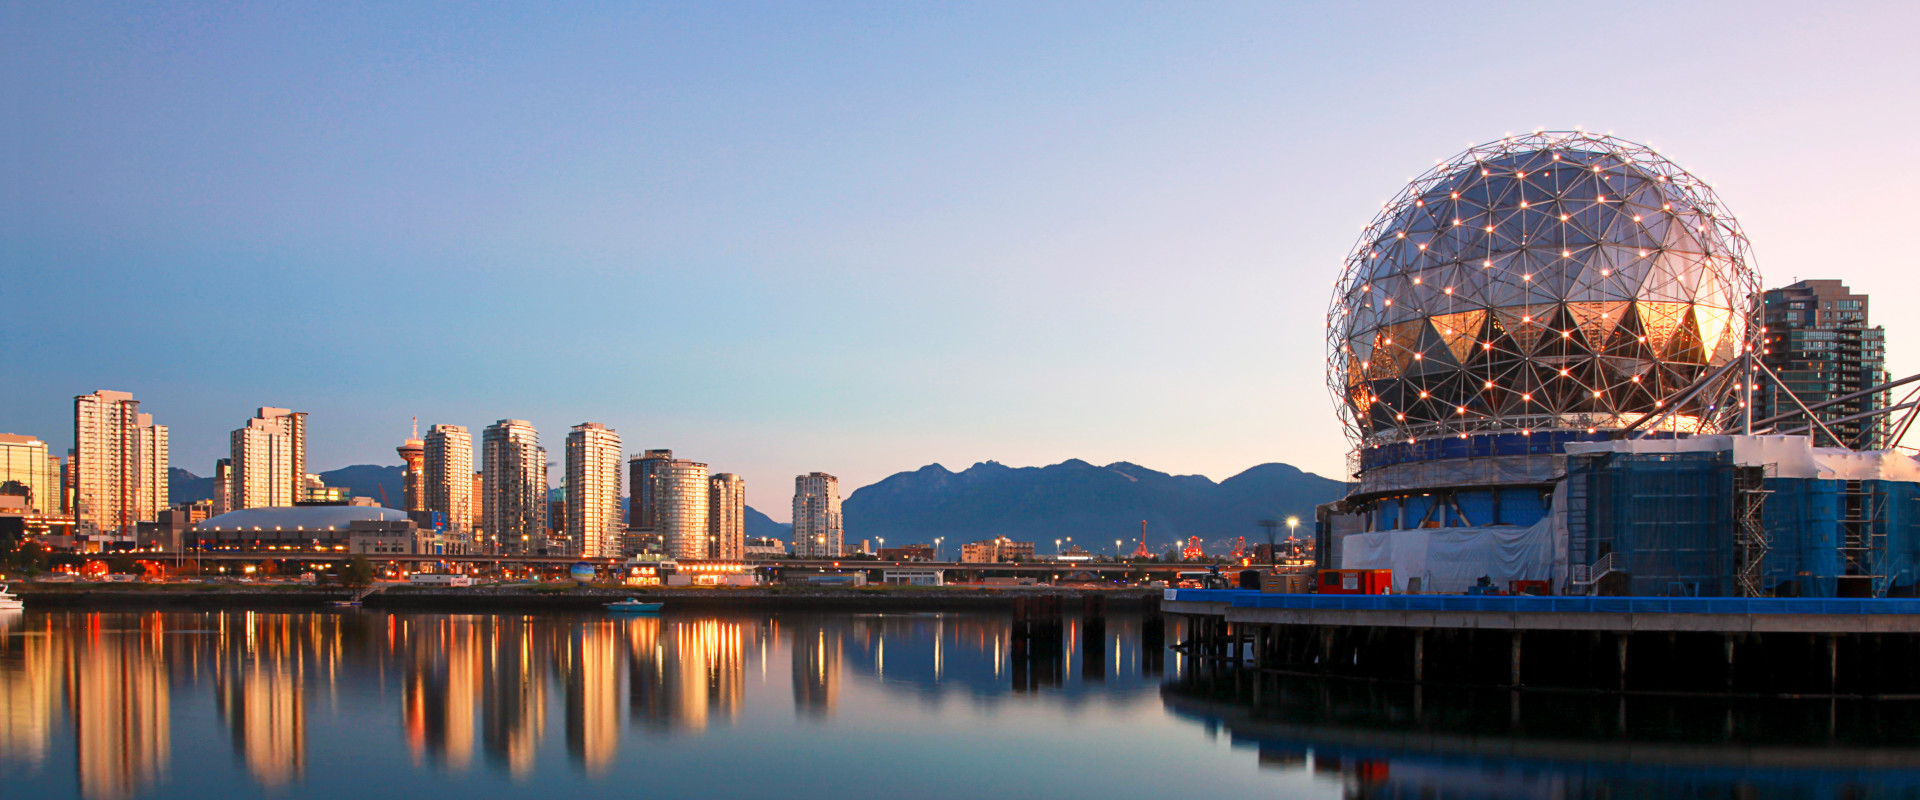 Science World in Vancouver overlooking the water with the city in the background